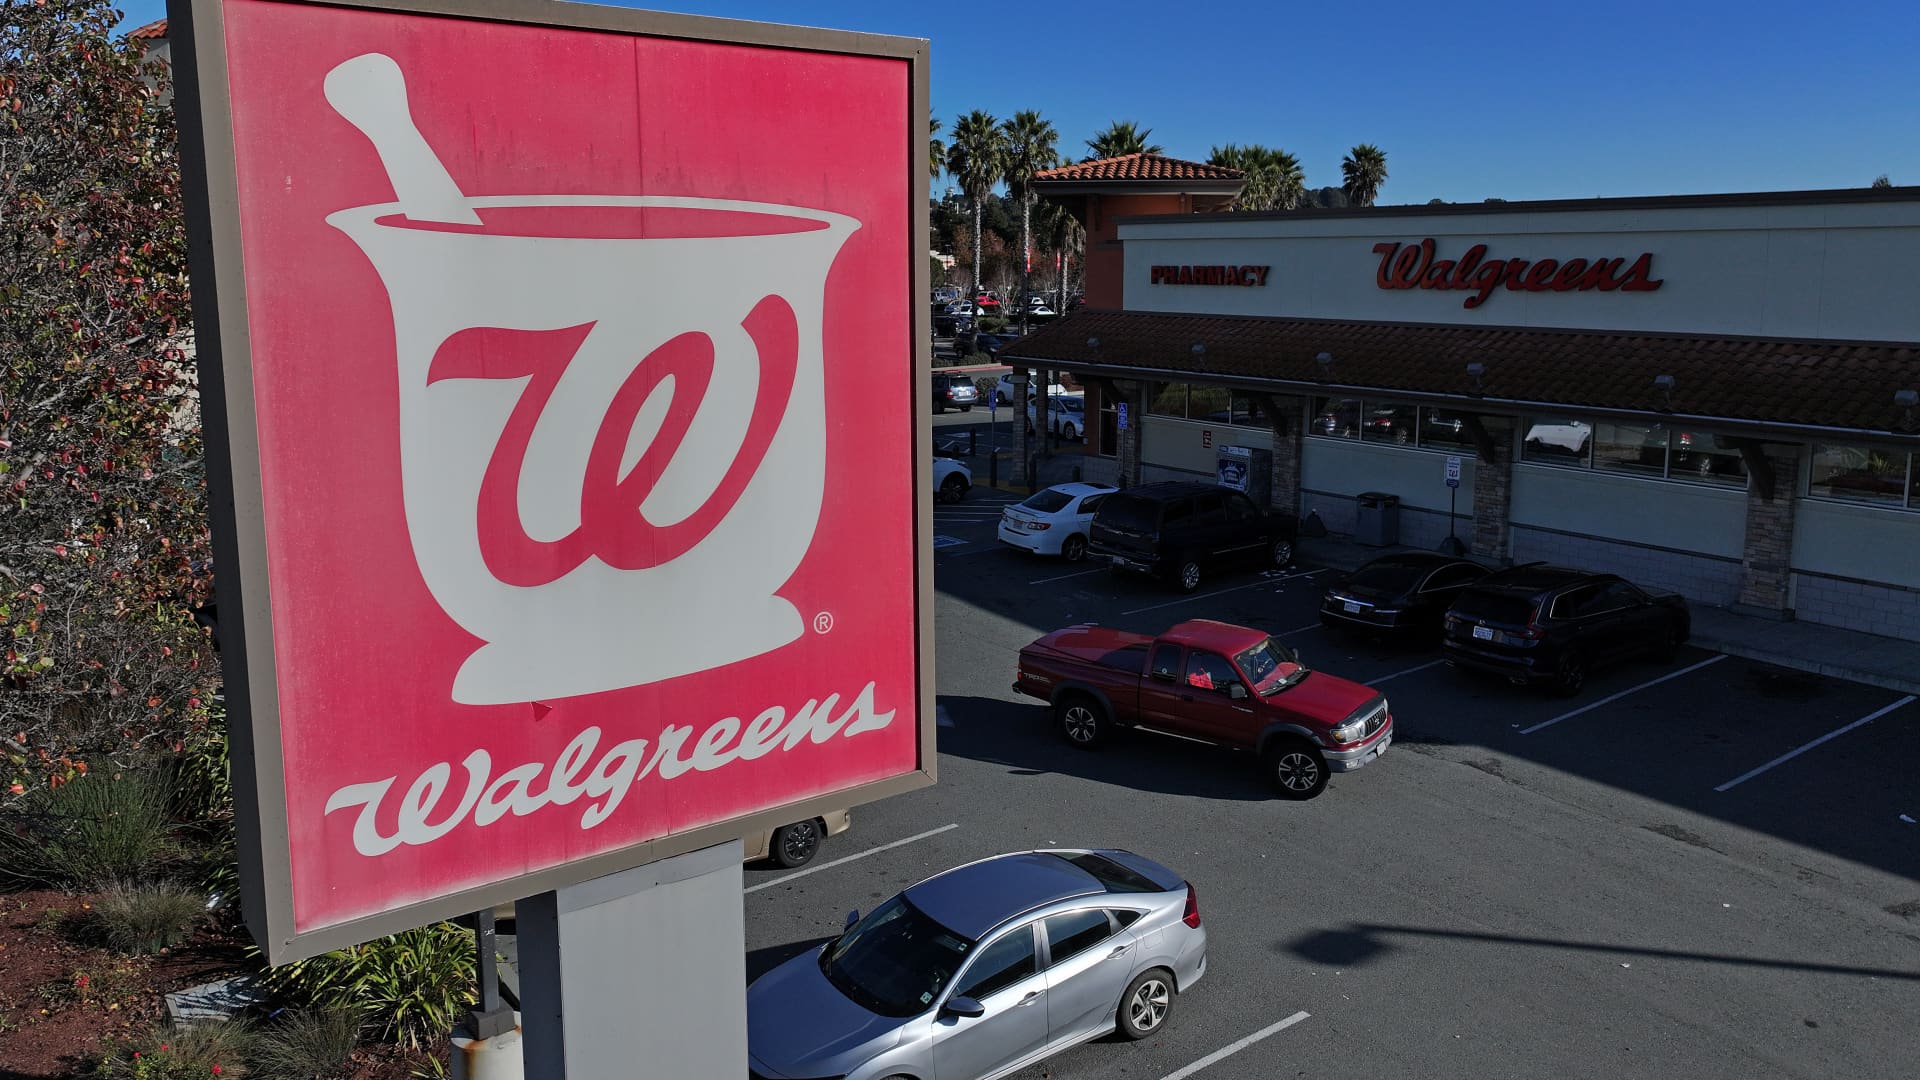 Walgreens and 3 other health-care stocks are going into our Bullpen watch list